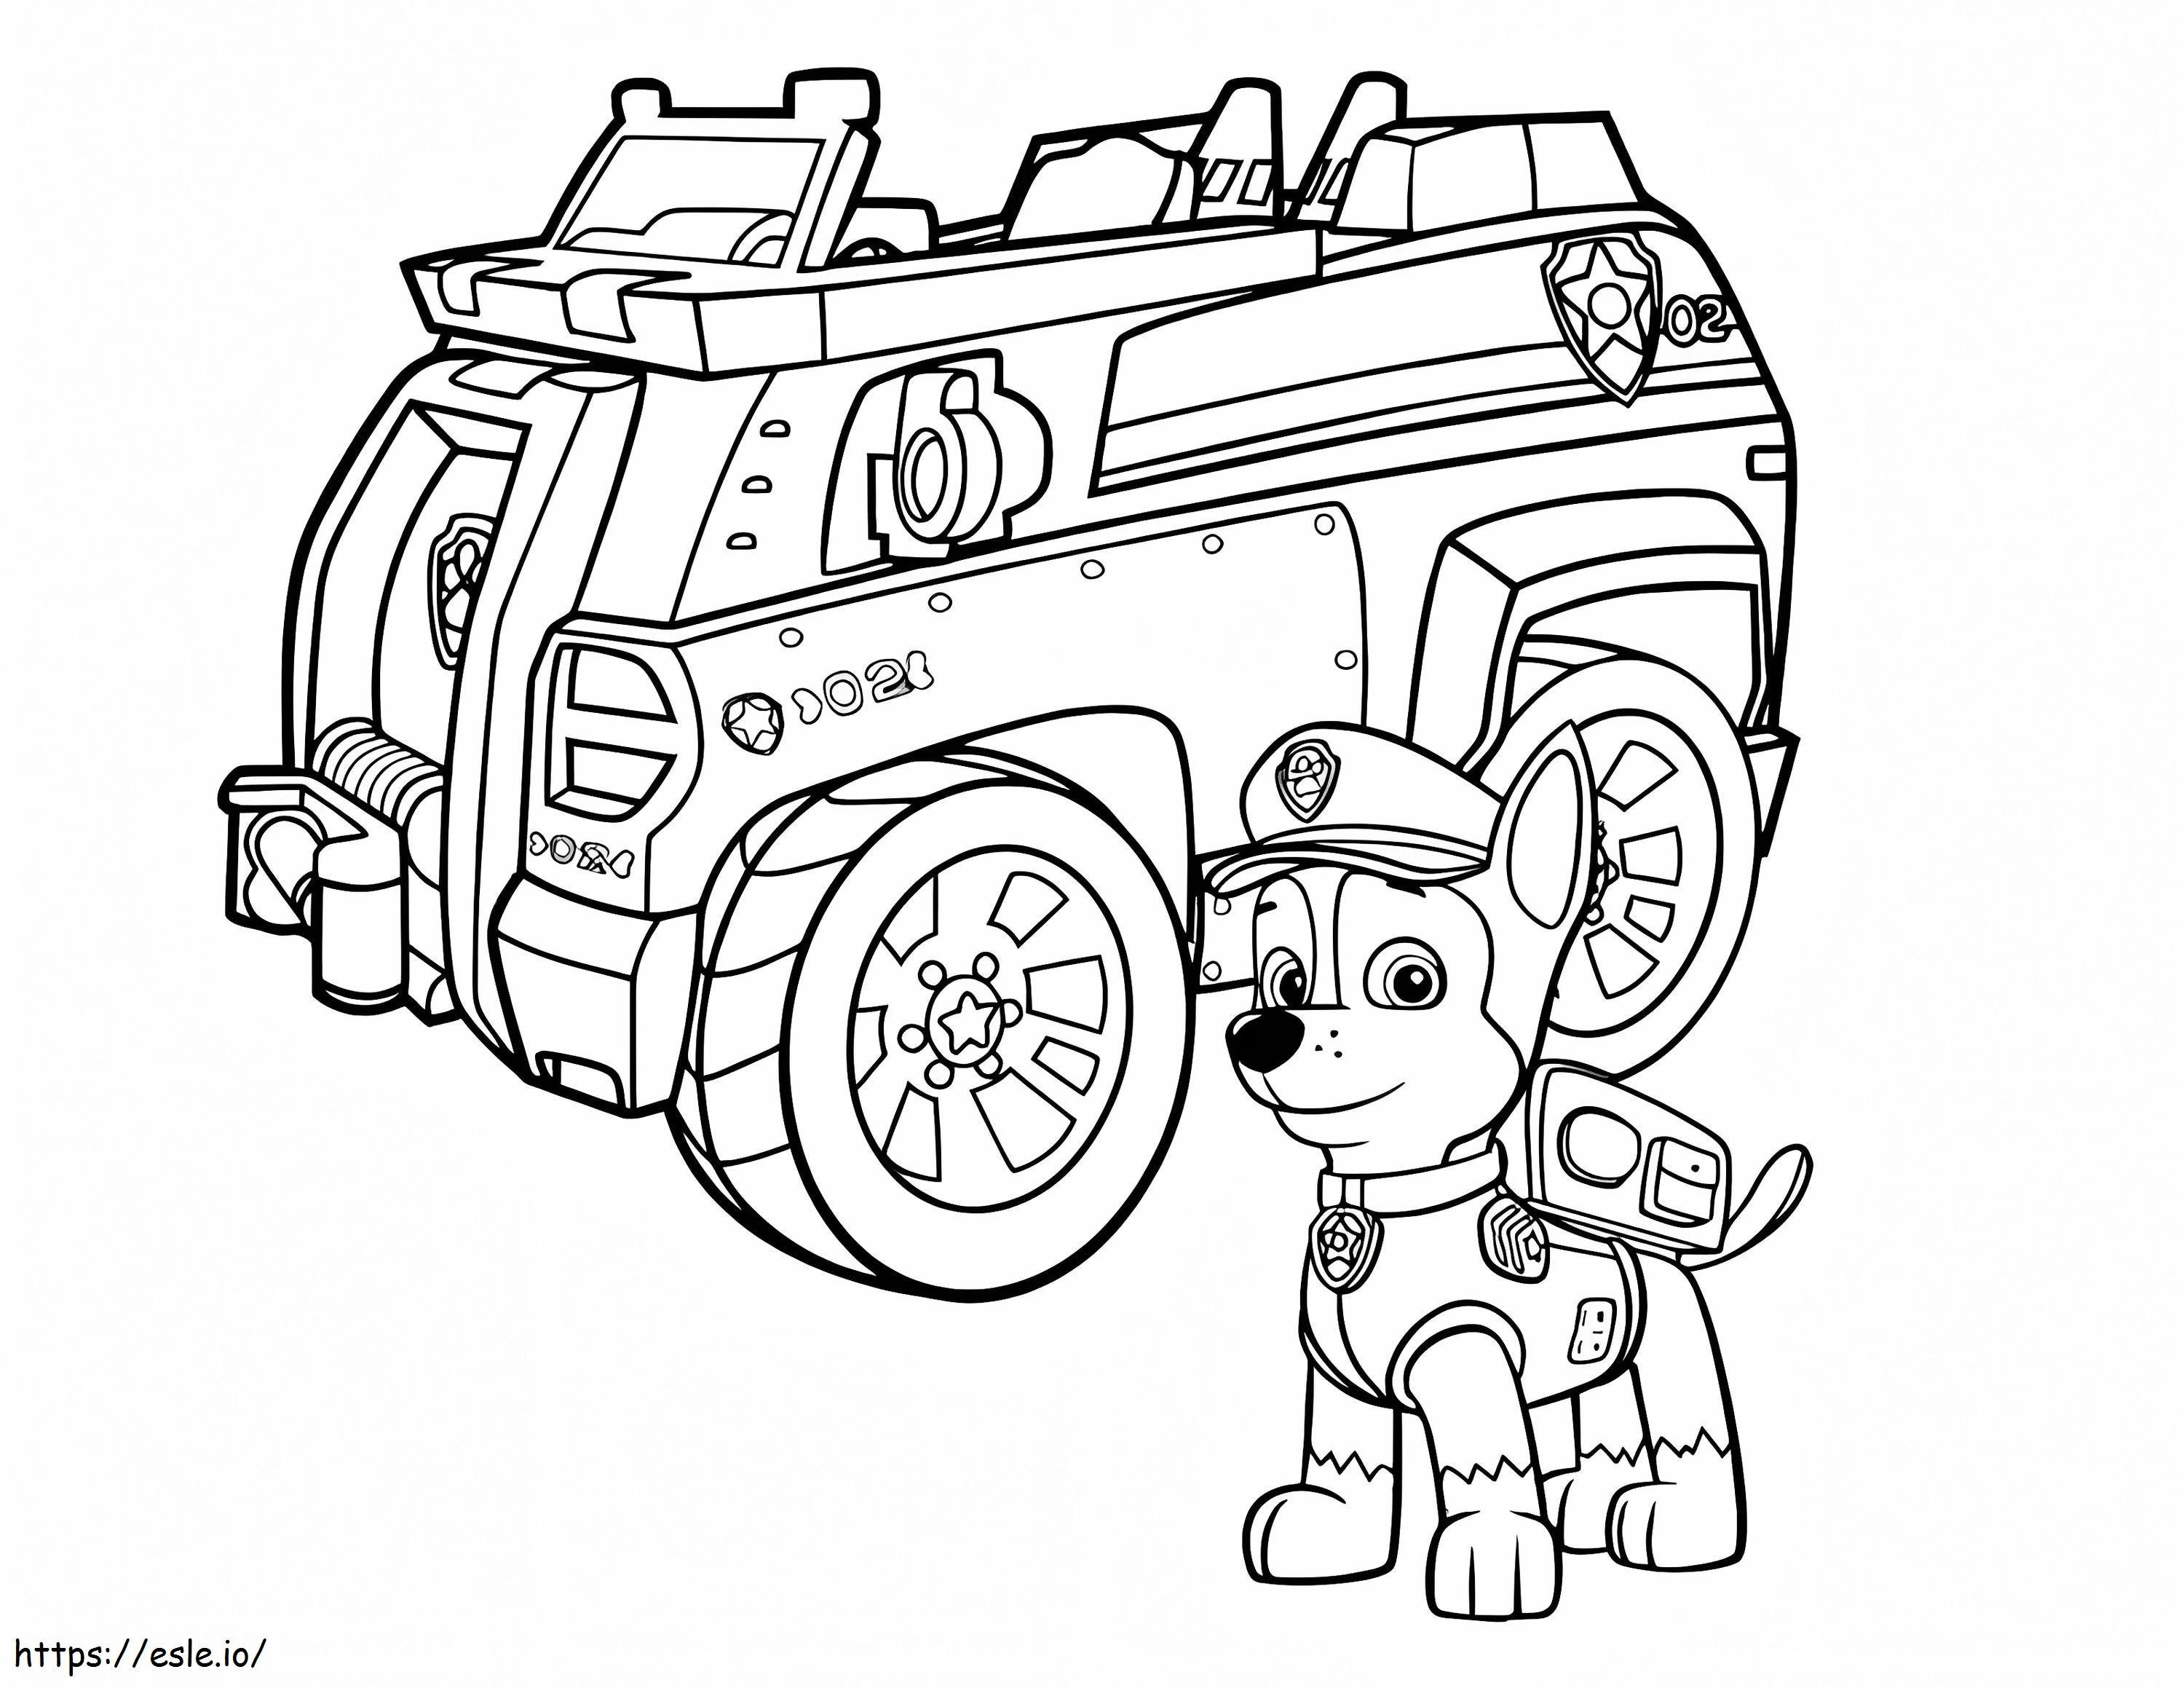 Chase Paw Patrol 12 coloring page